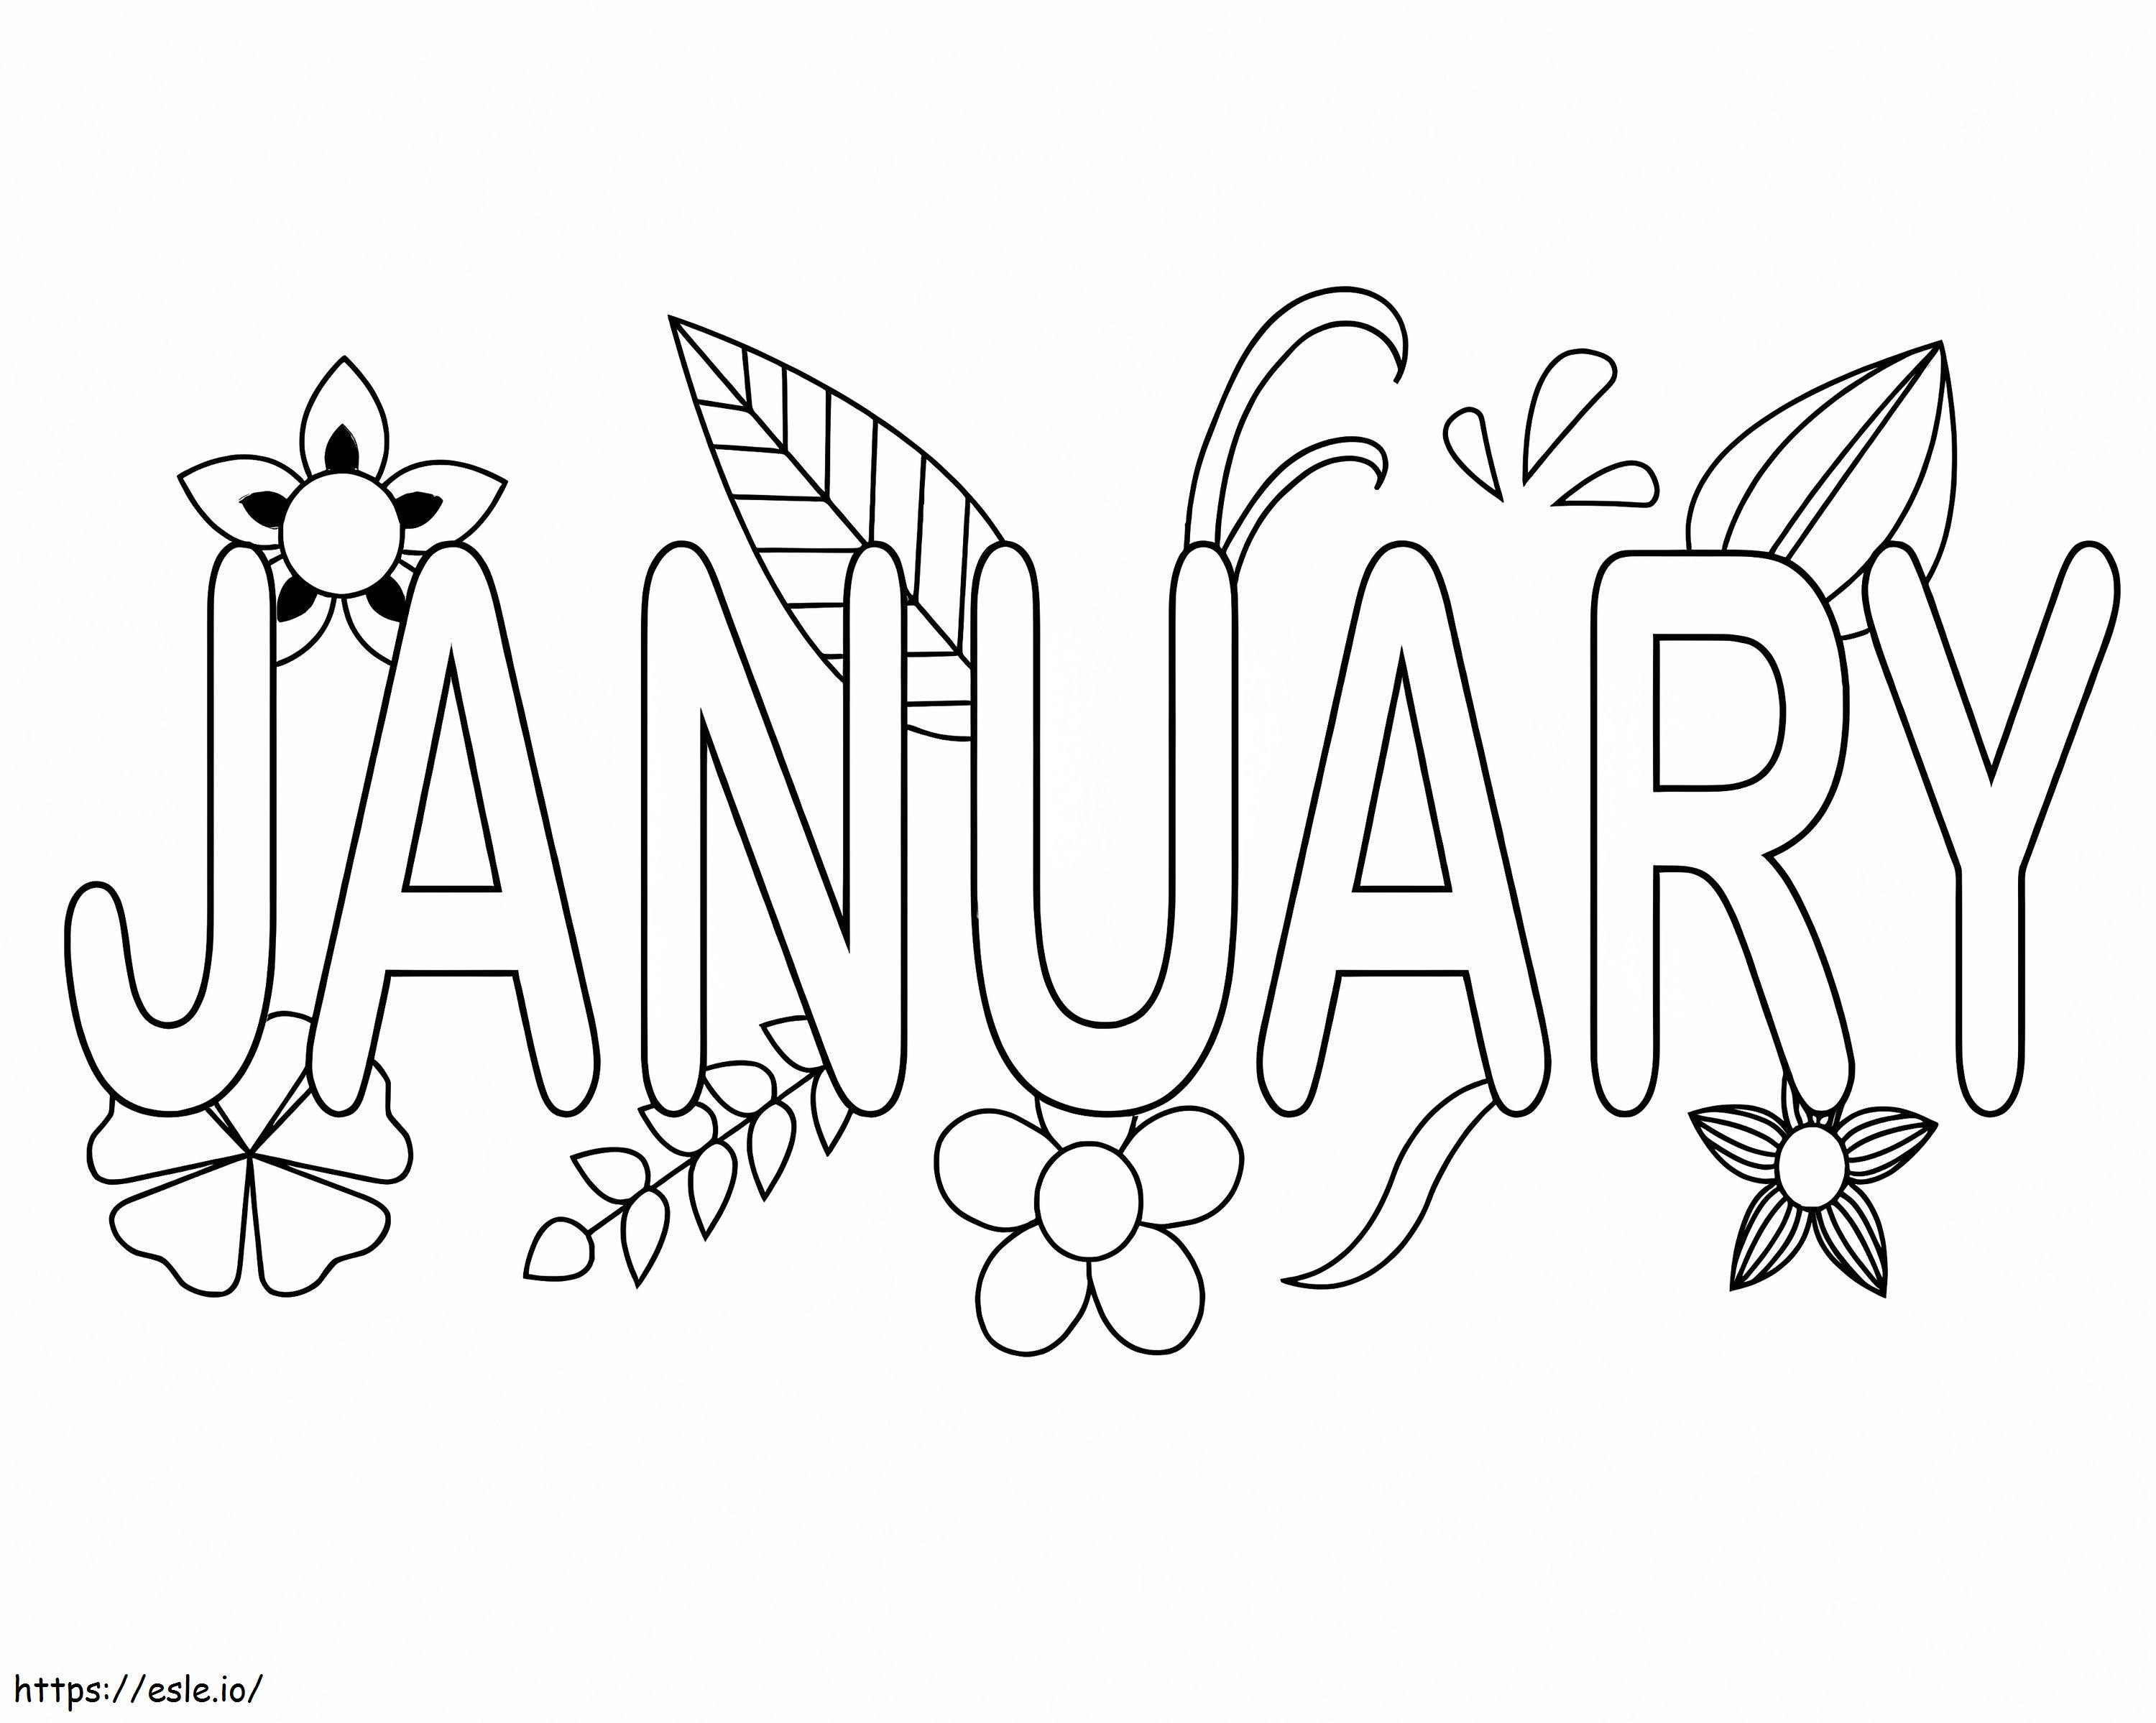 January With Leaves And Flowers coloring page